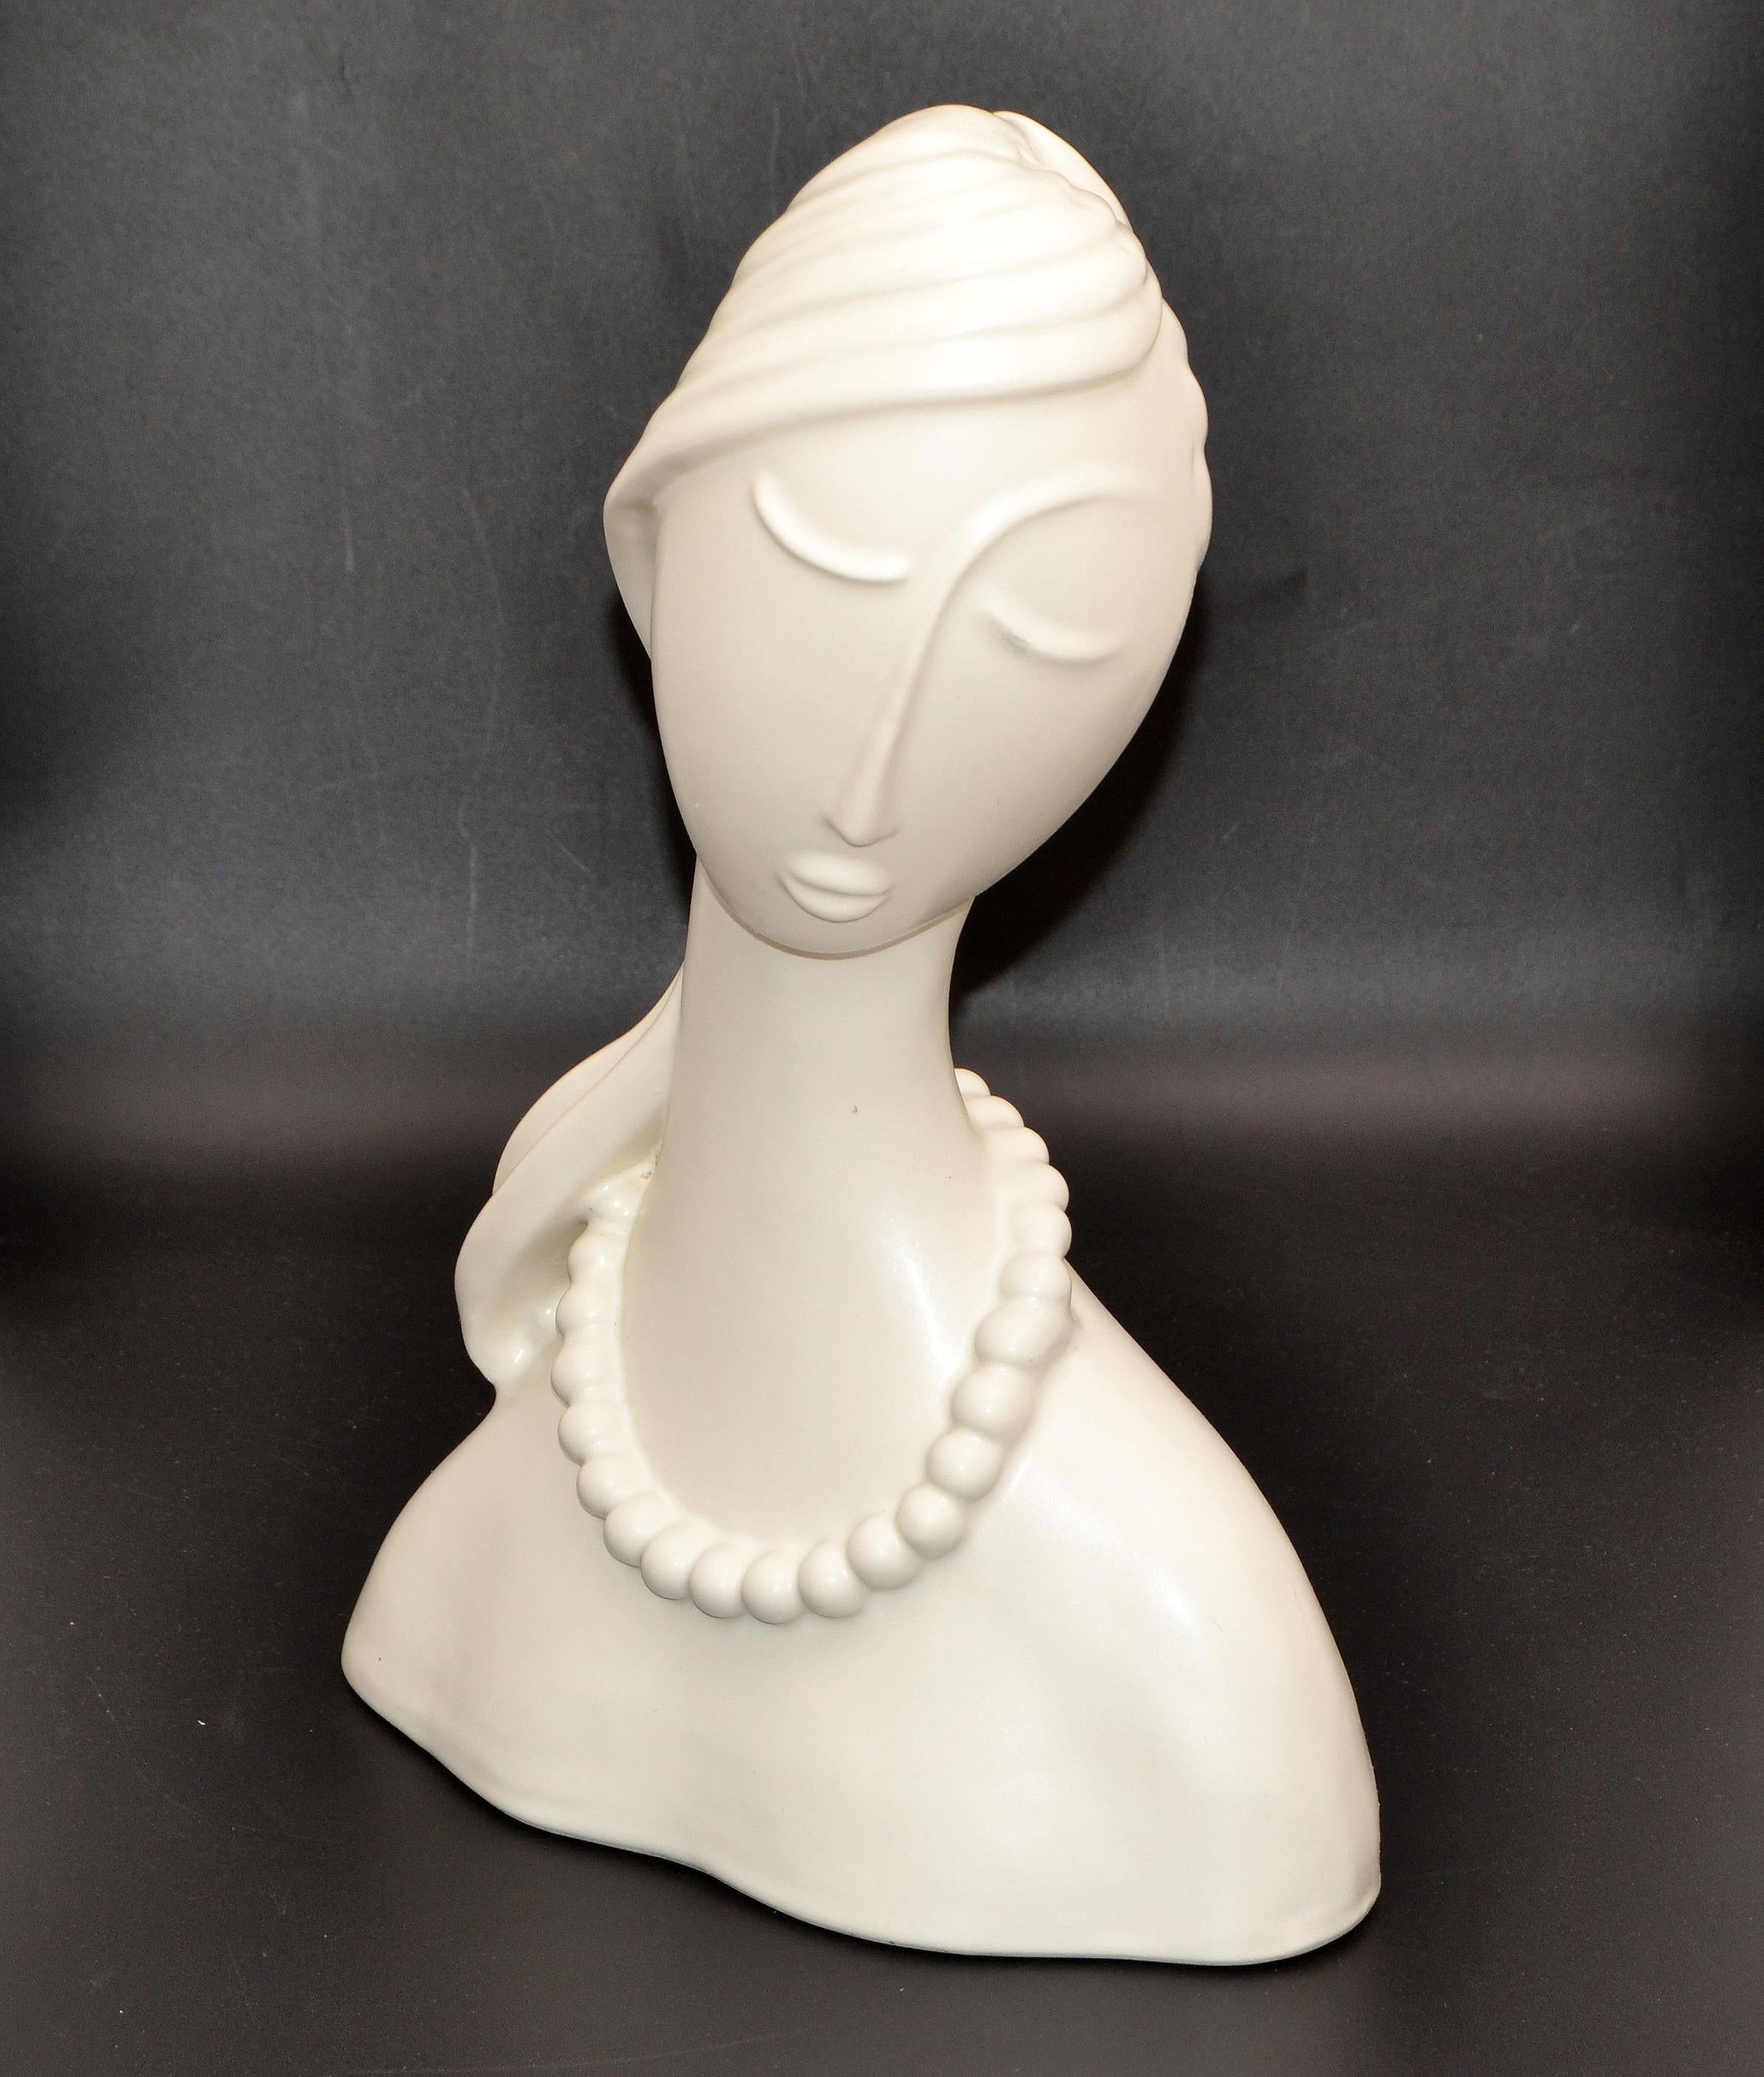 Haeger Art Deco style manner of Franz Hagenauer white ceramic lady bust or table sculpture.
Figurative sculpture depicting the head & chest of a Lady figure with long Hair and necklace adornment.
Comes with green felt covers underneath to protect